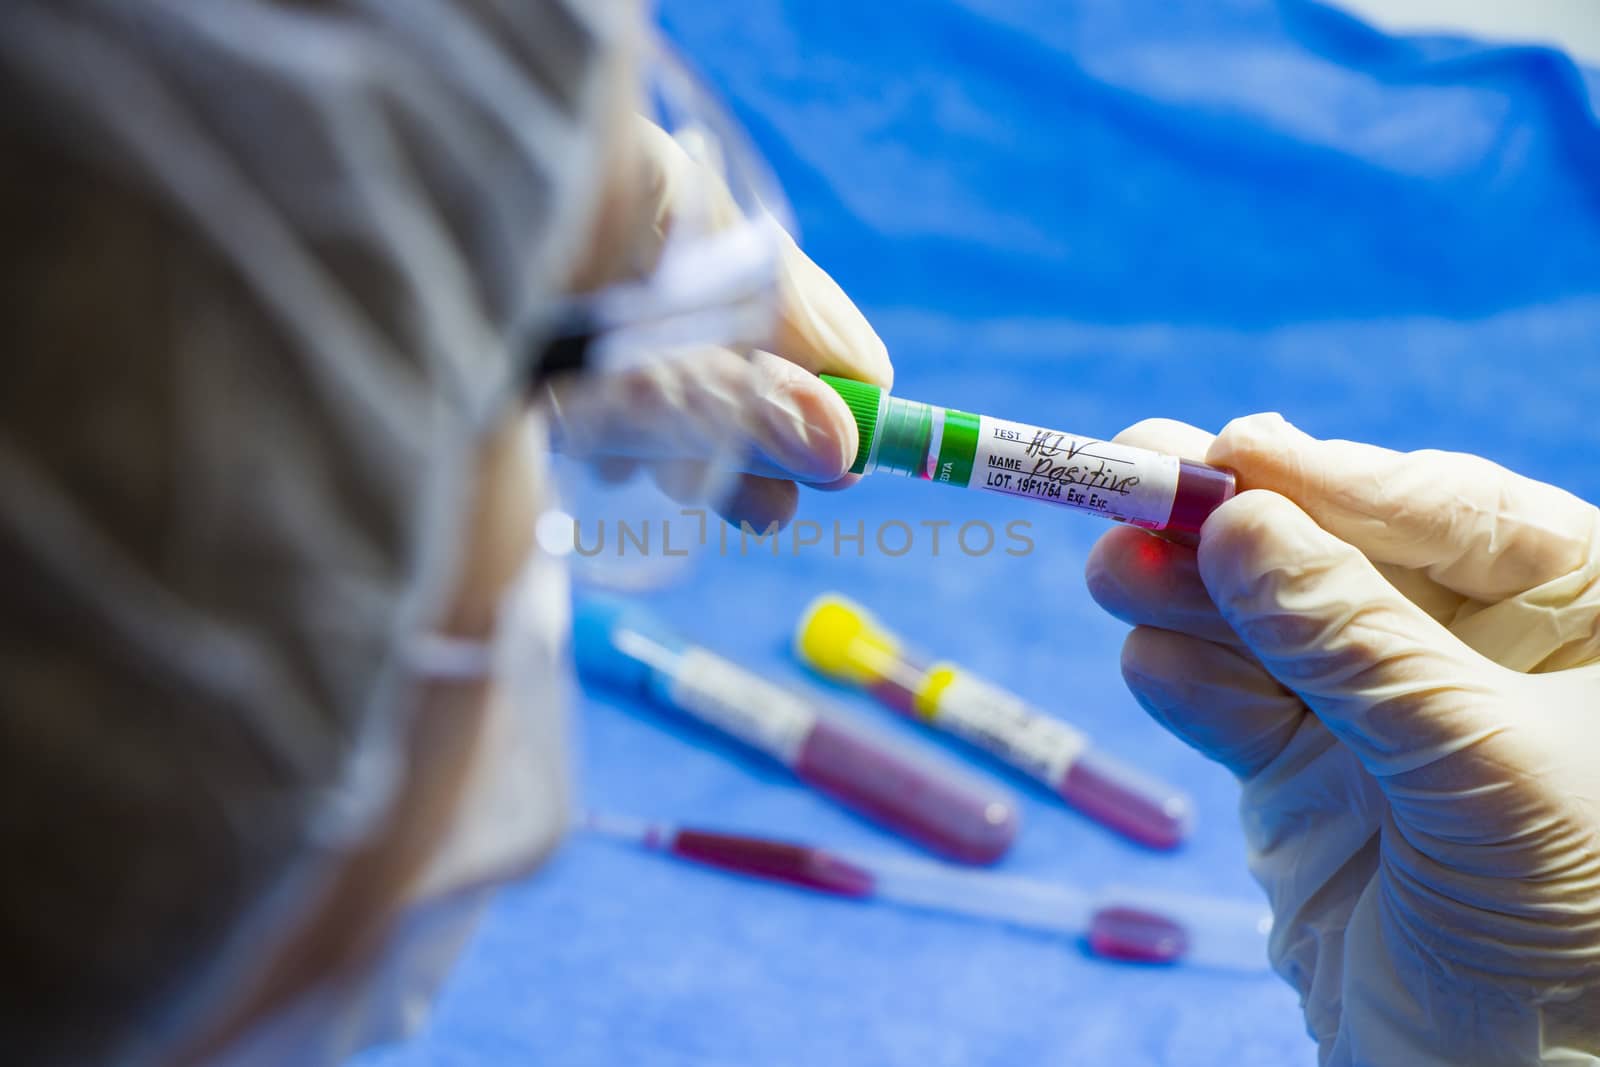 Hiv and aids infection test, doctors face and hand holding tube with blood on the blue background. Studio shoot.